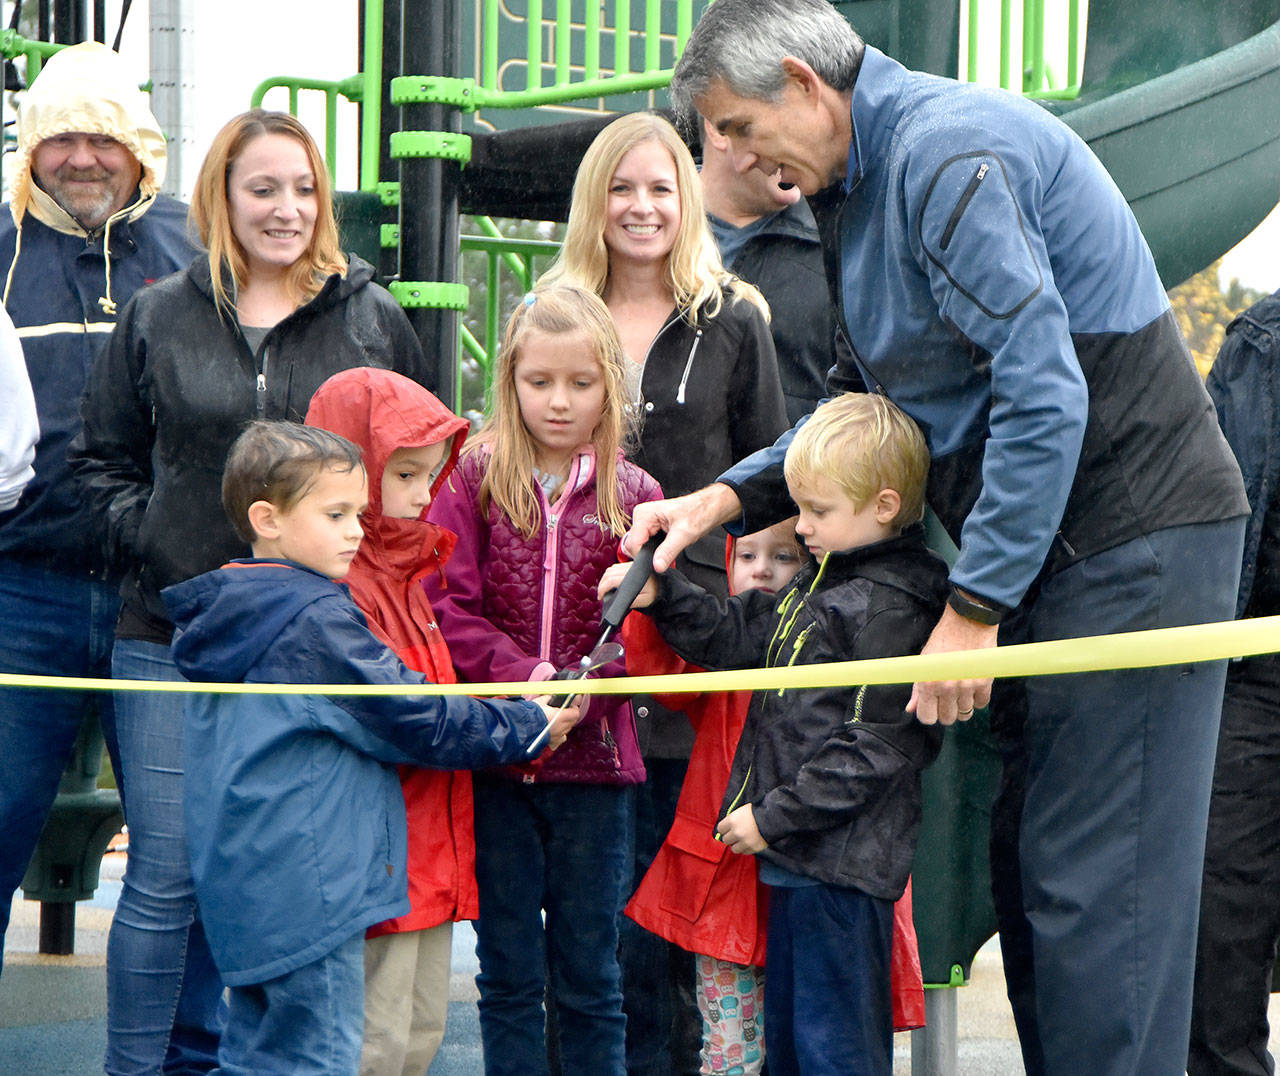 Each touching part of the giant ceremonial scissors, all of the children at Ironwood Park Wednesday had a hand in cutting the ribbon on park improvements. (Carol Ladwig/Staff Photo)